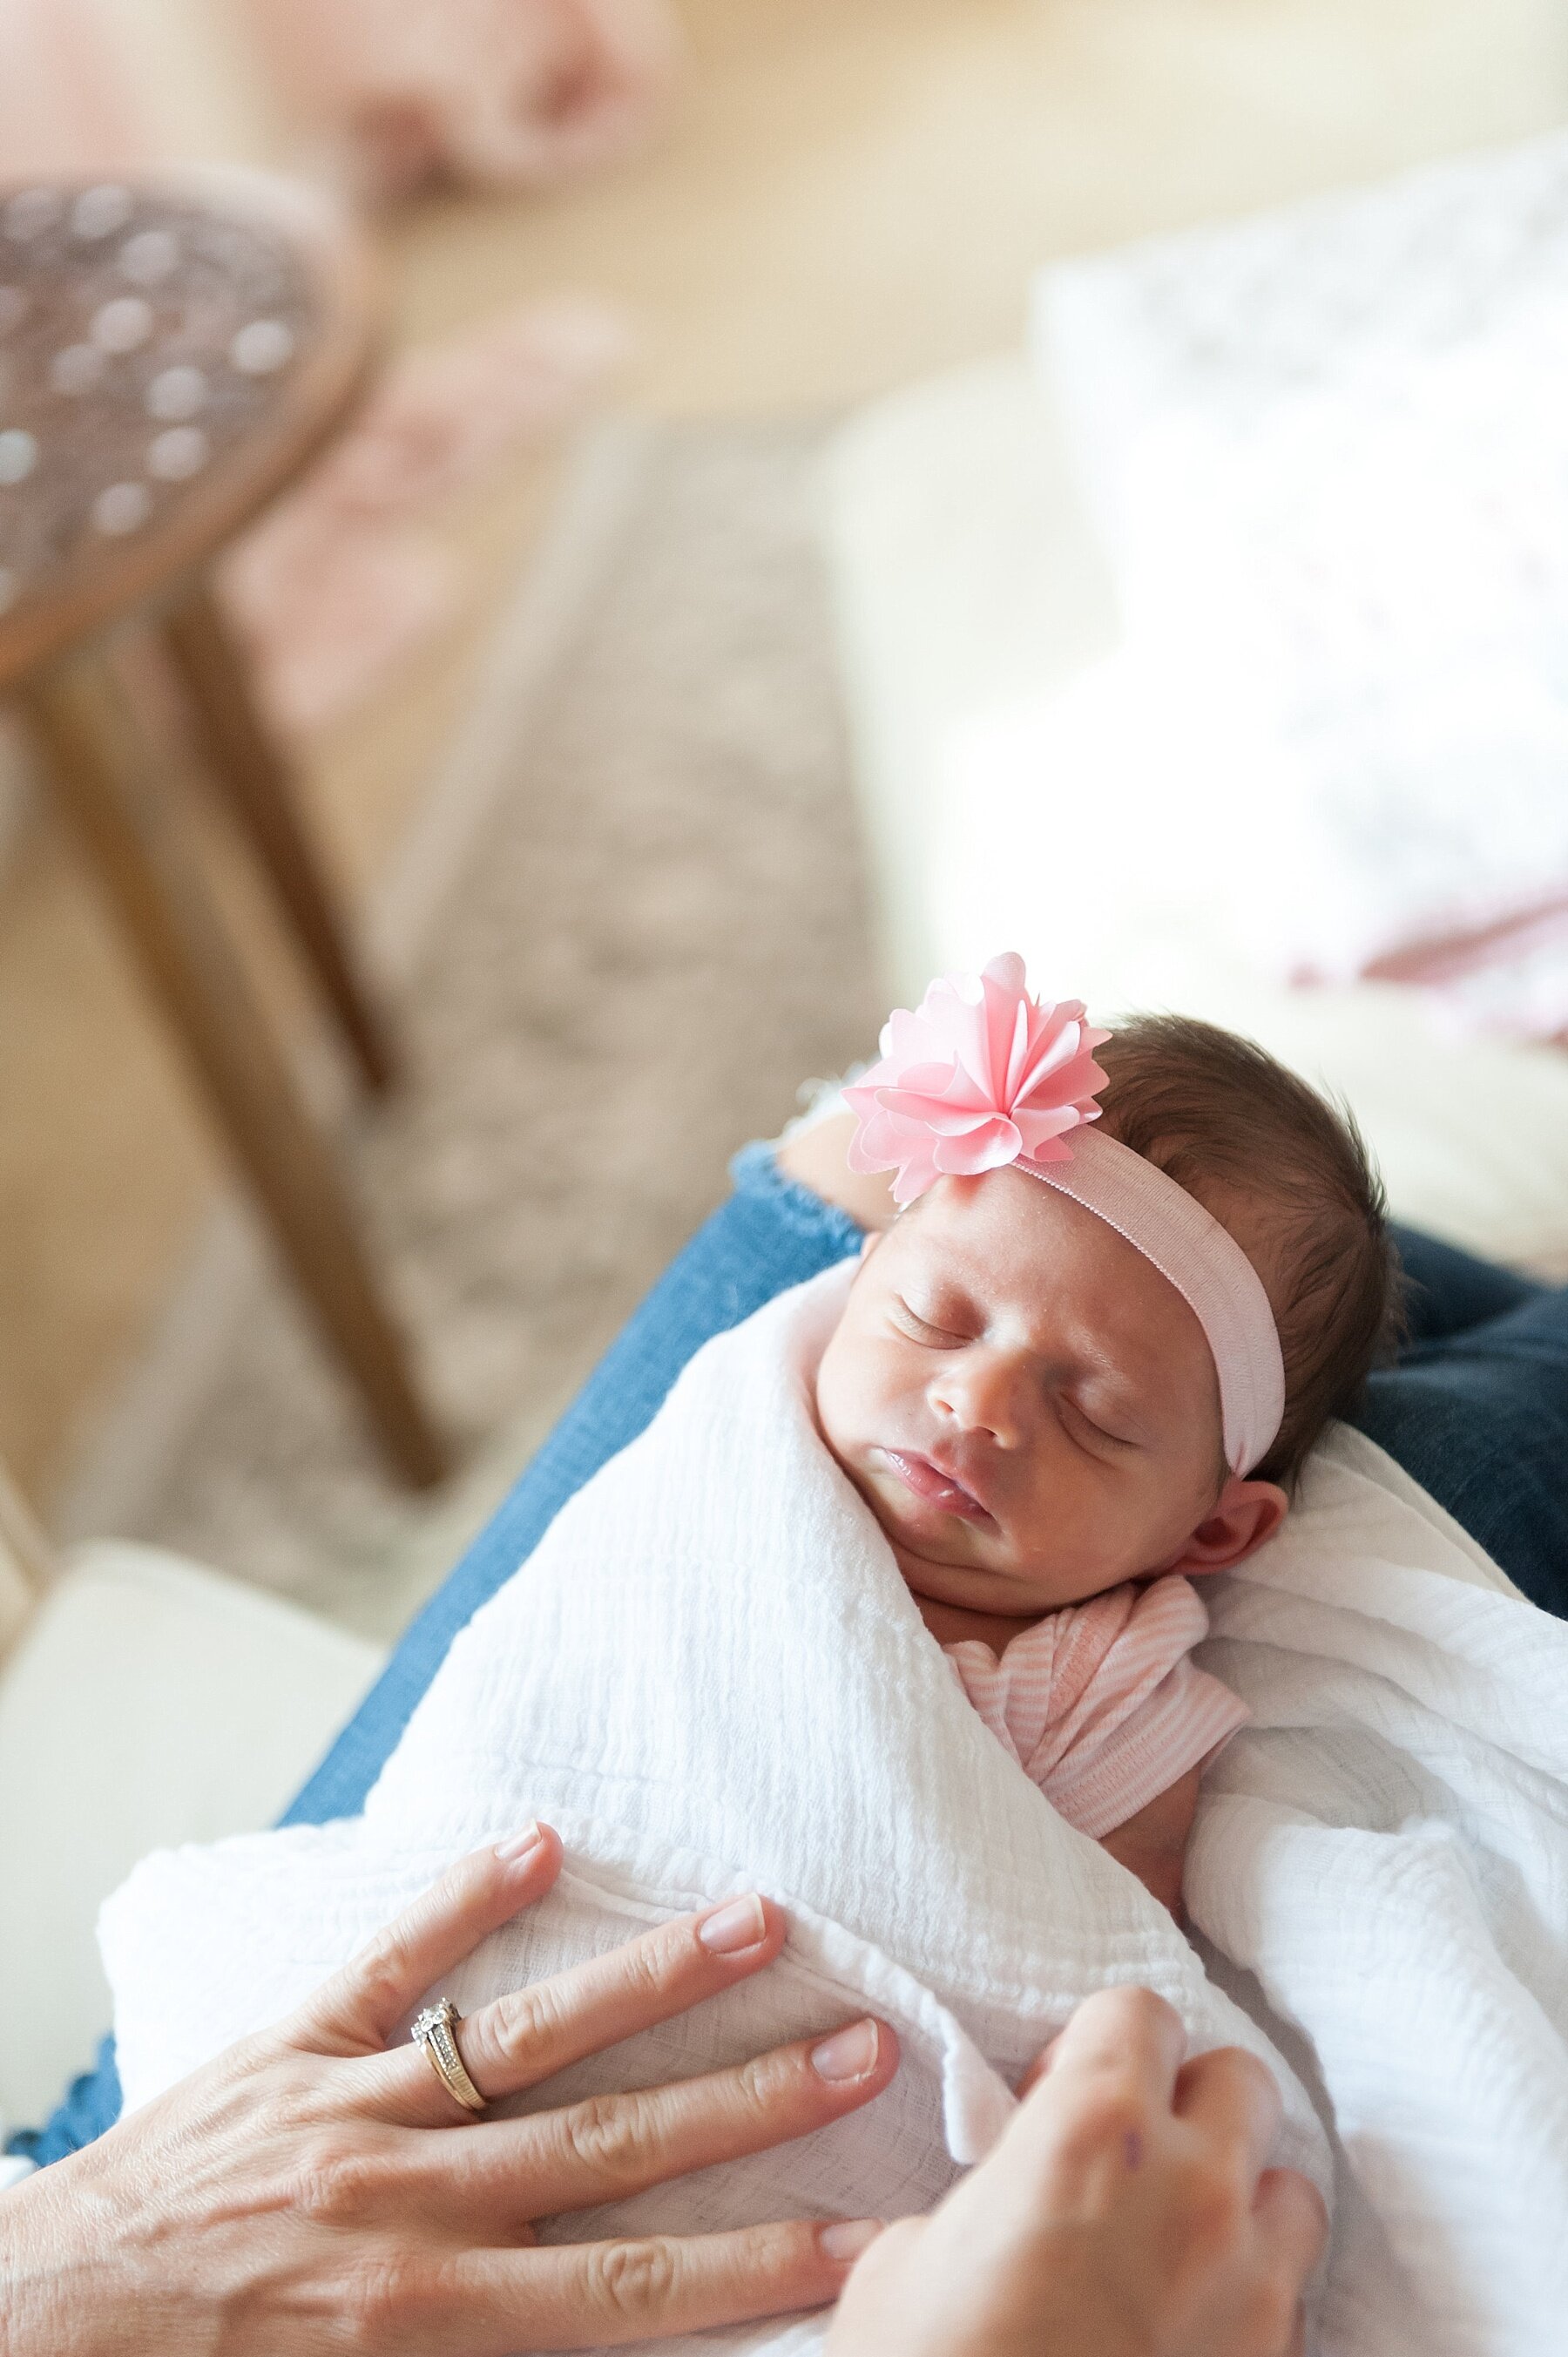 Wendy Zook Photography | Frederick MD newborn photographer, Maryland newborn photographer, Frederick newborn portraits, in home newborn photography, lifestyle newborn portraits, Frederick MD lifestyle newborn portraits, Maryland newborn photographer in home